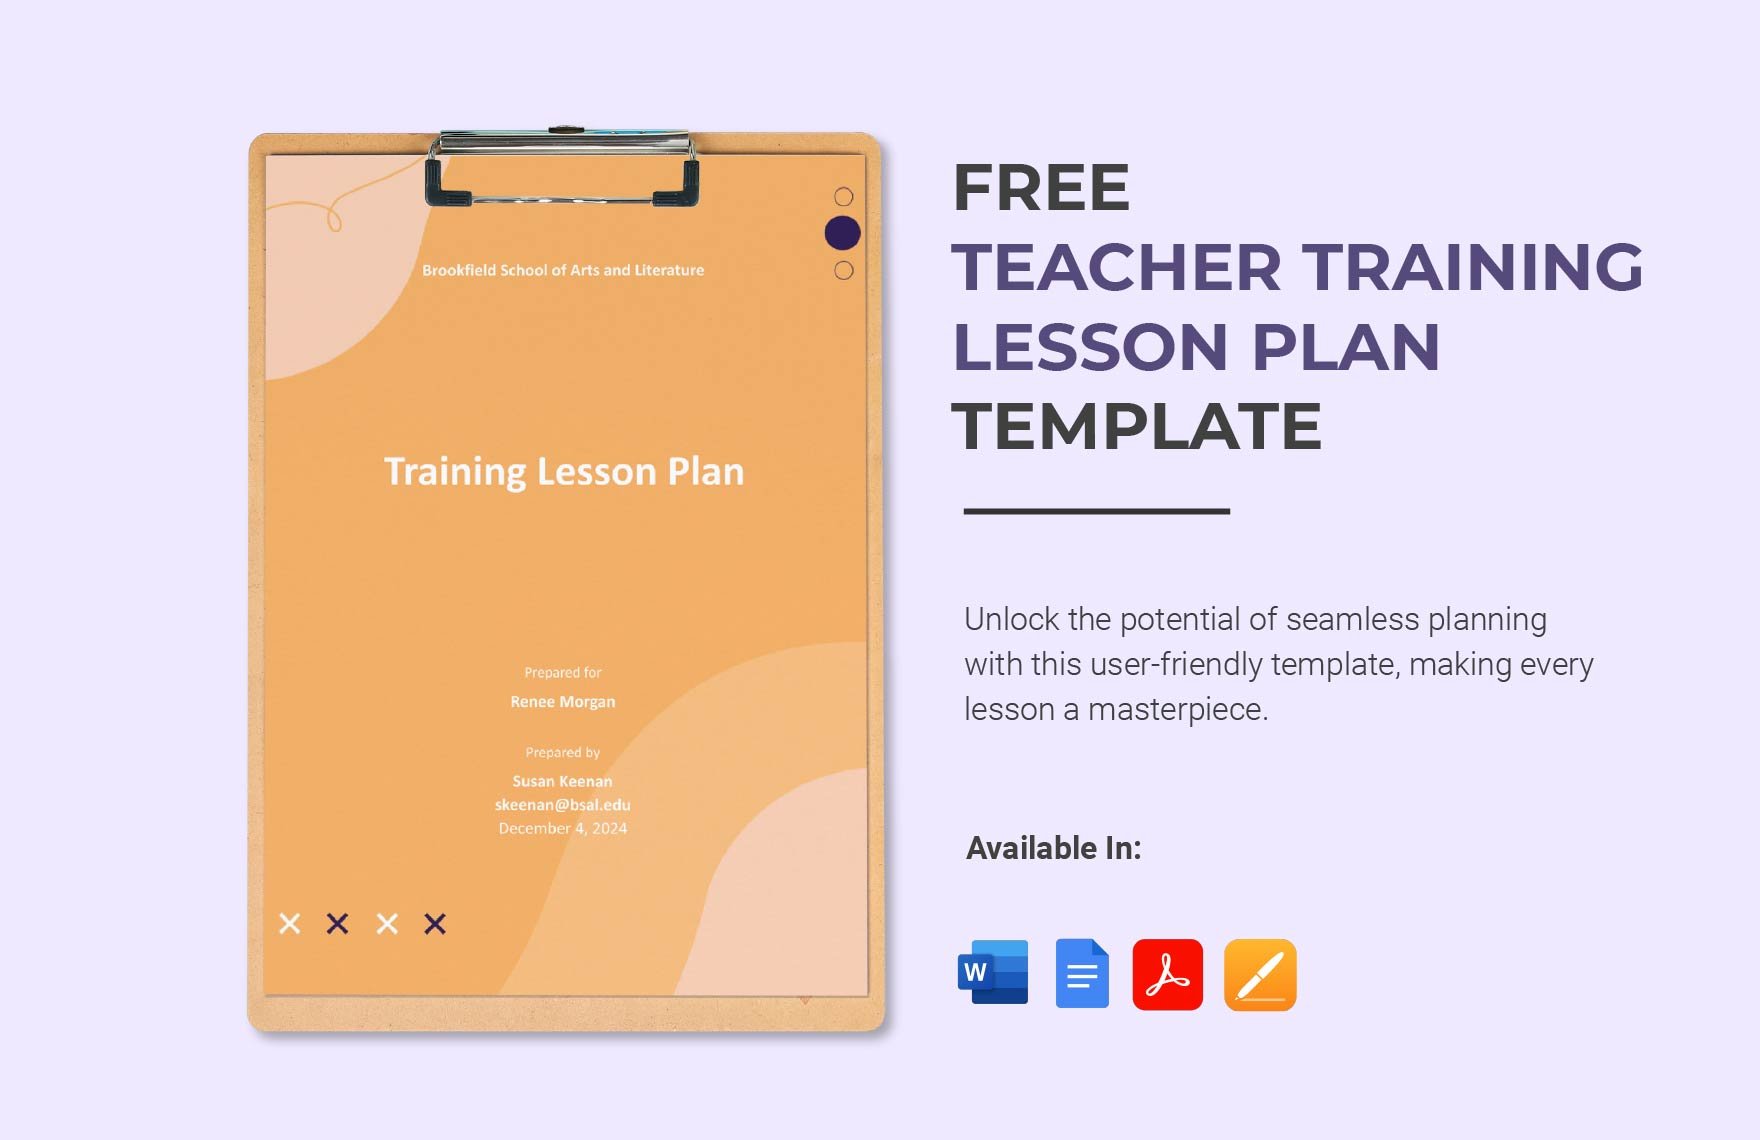 Free Teacher Training Lesson Plan Template in Word, Google Docs, PDF, Apple Pages